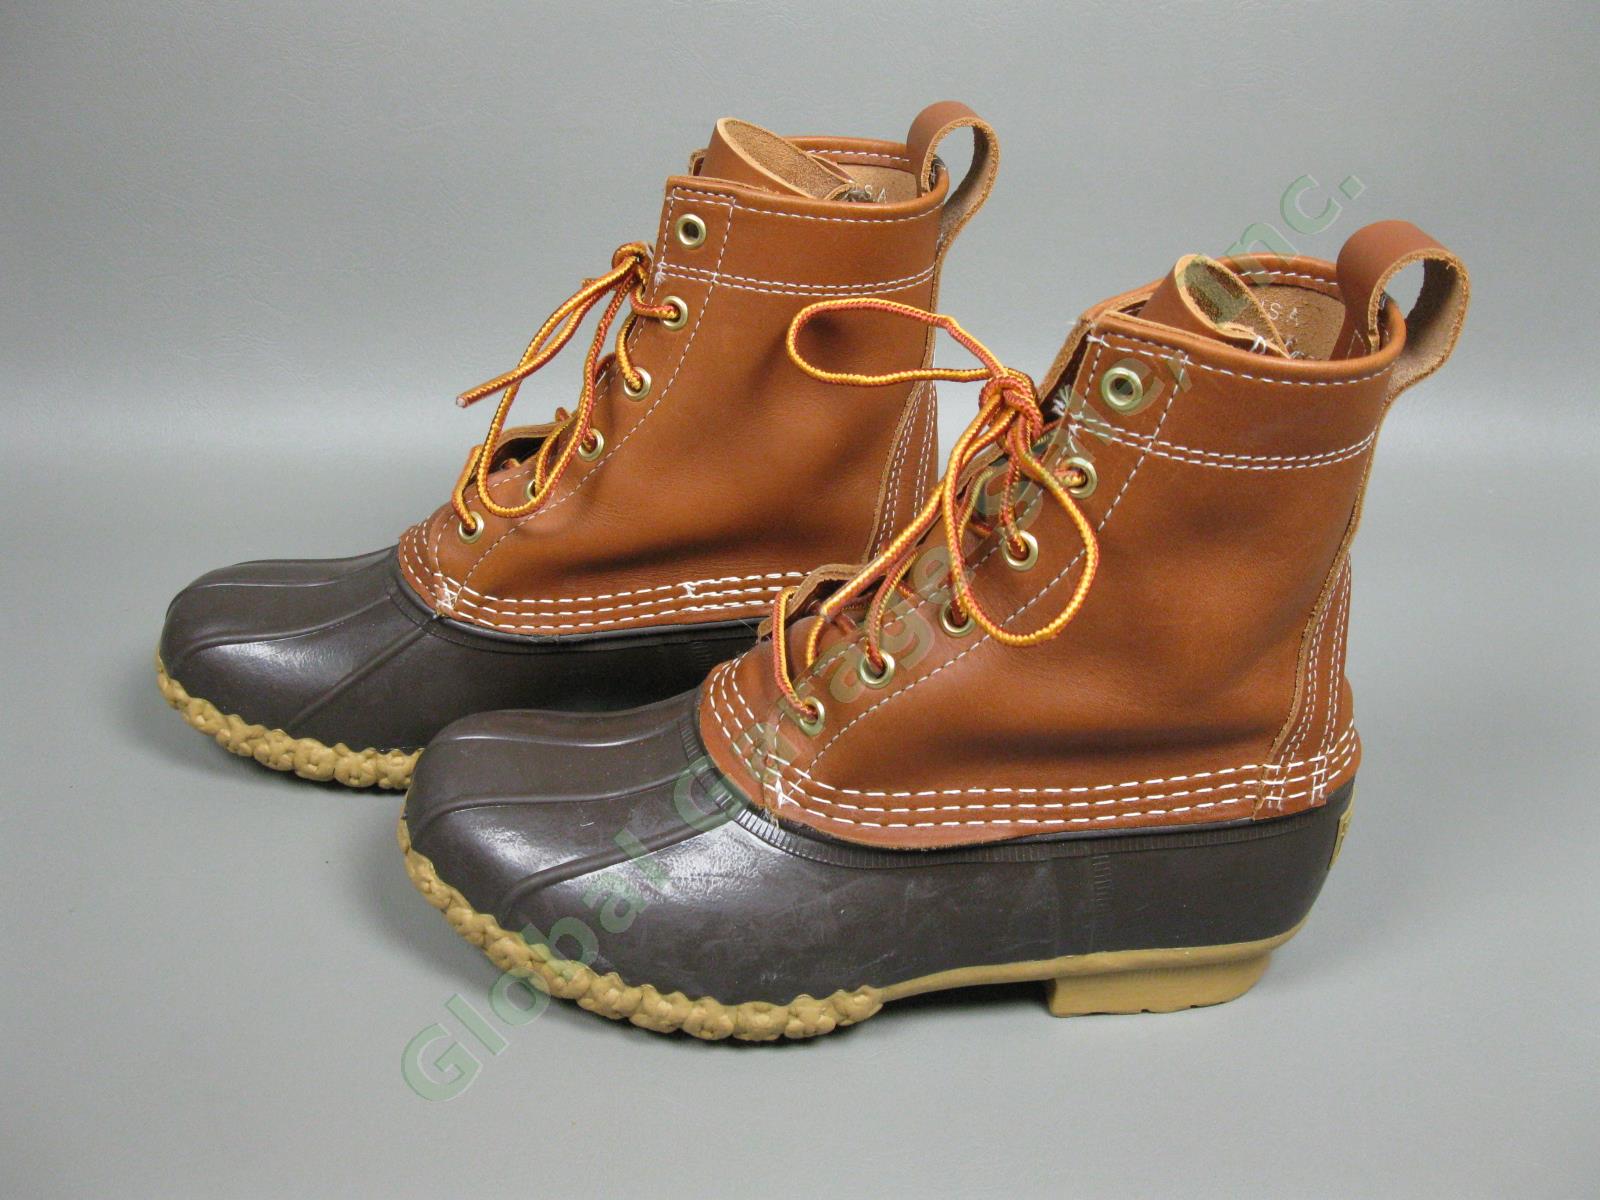 LL Bean Original Leather/Rubber 8" Duck Boots Womens Size 6 USA Made #06009 NR 2